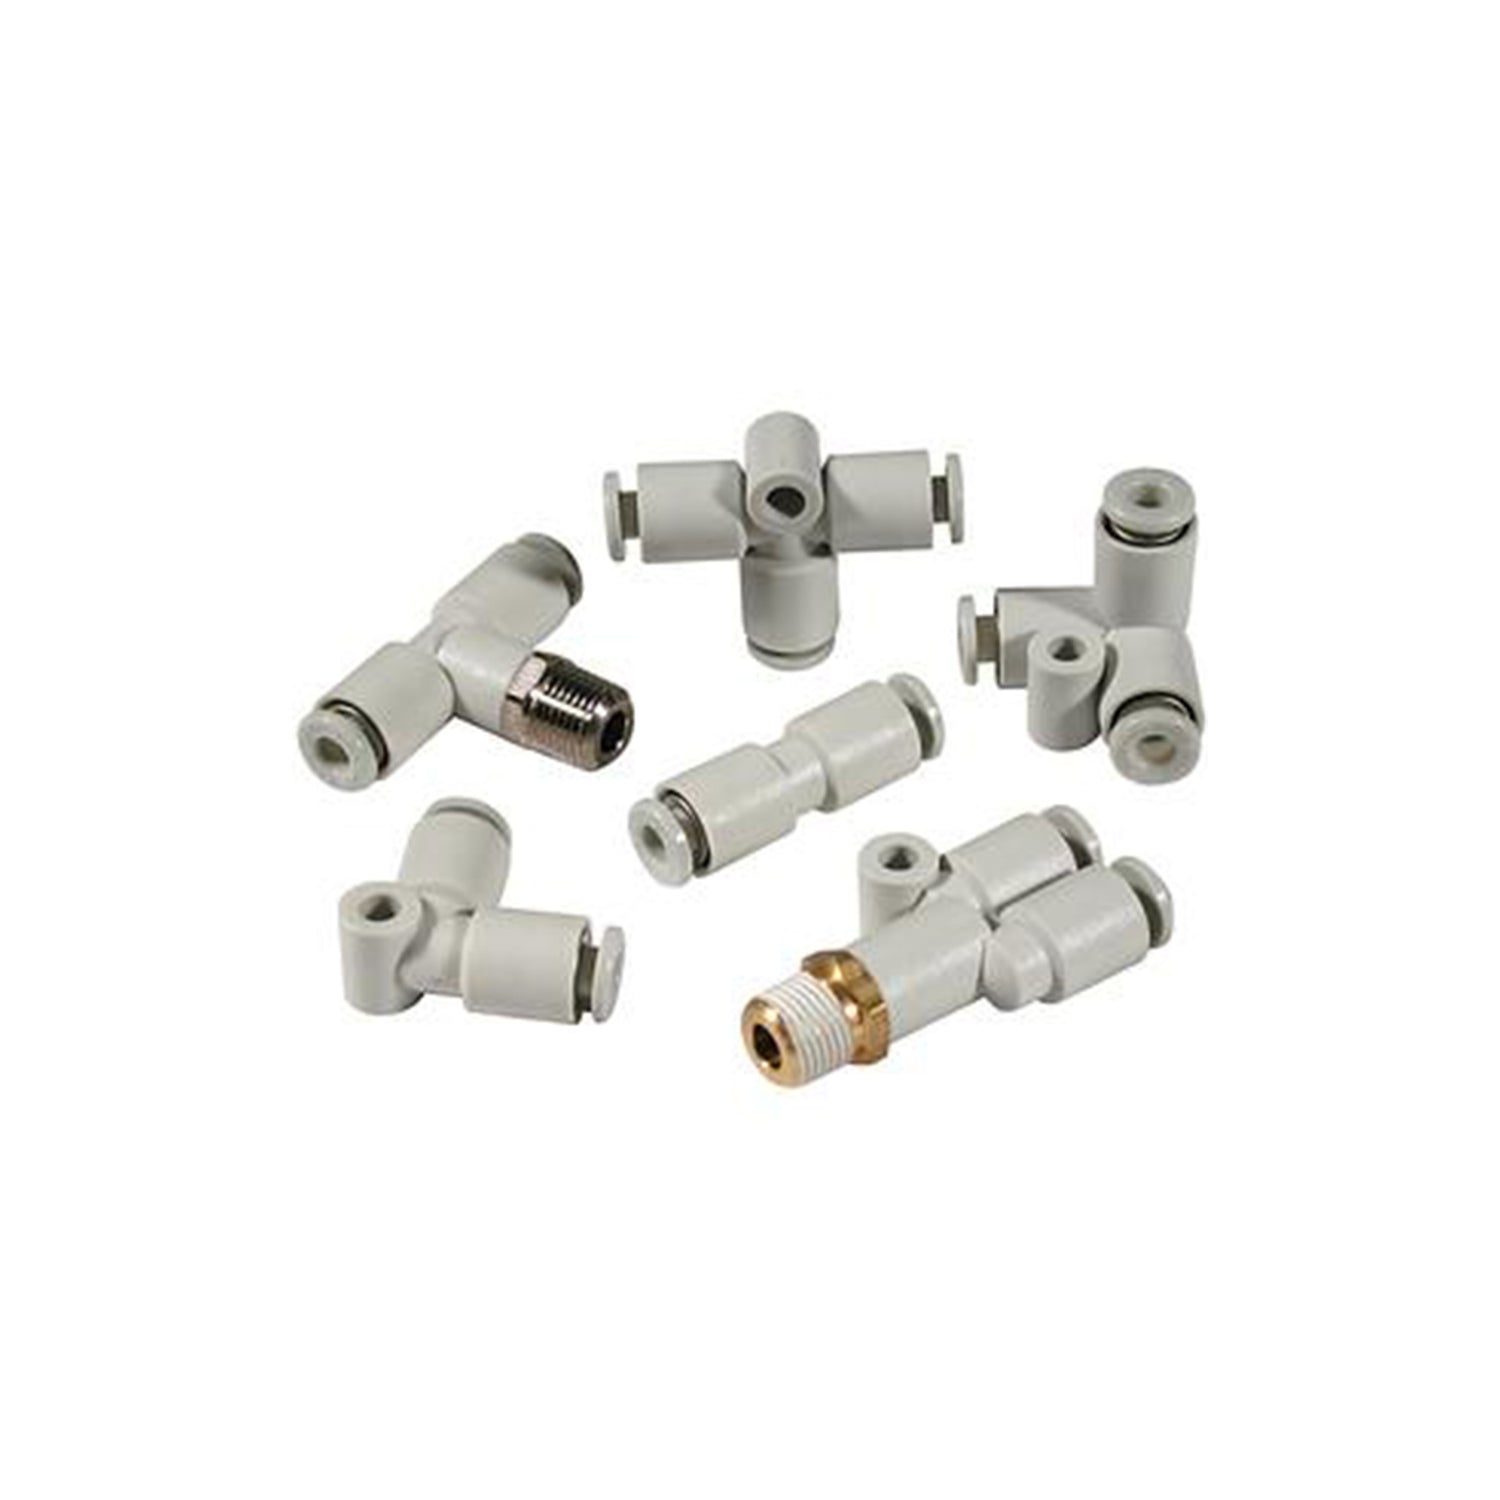 Branch Tee Pipe Fittings and Unions